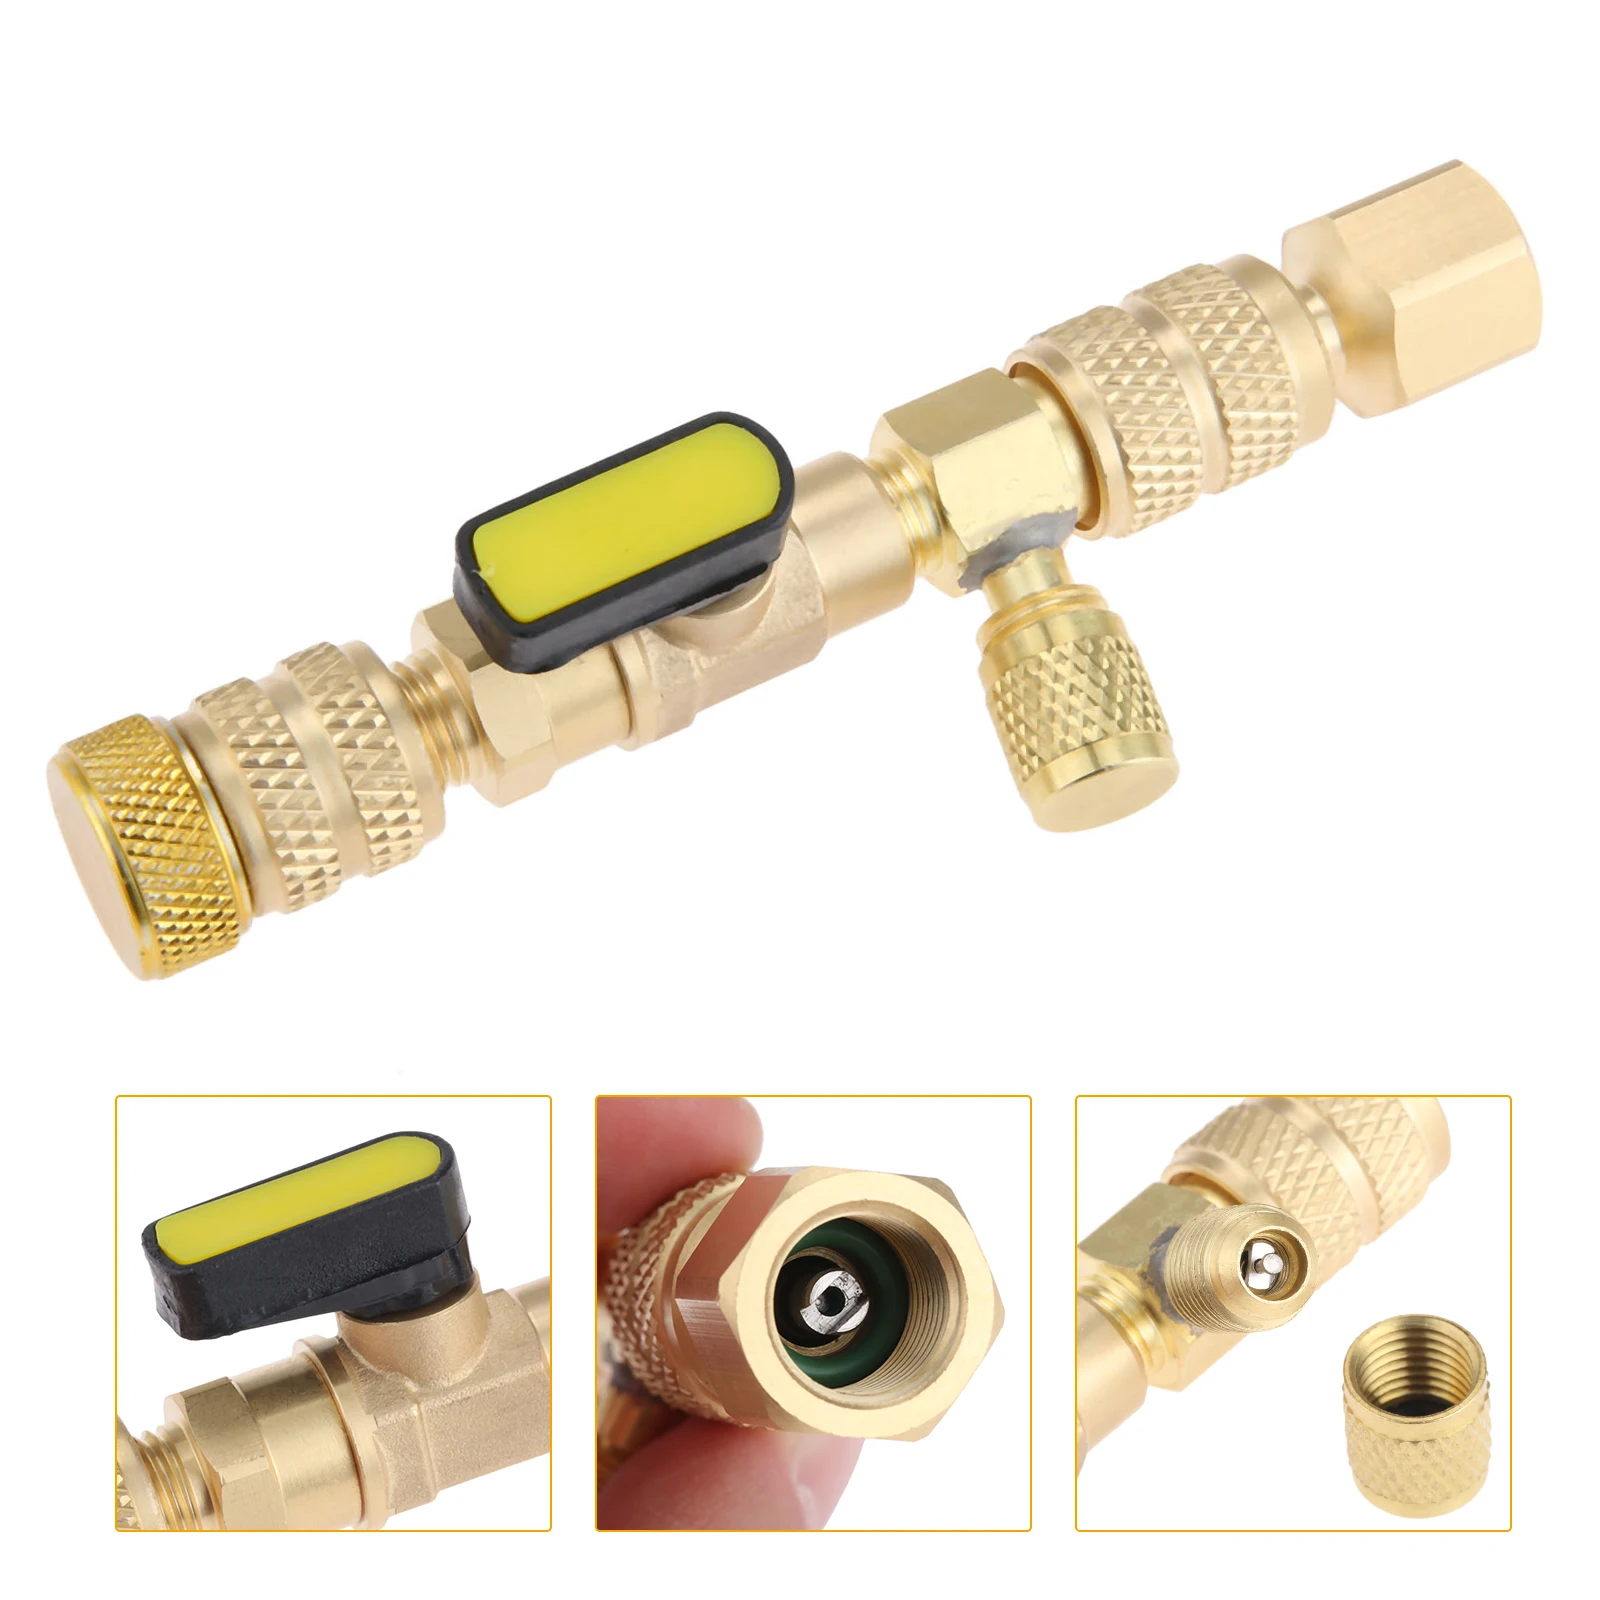 Hilitand R22 R410 Valve Core Remover Installer Changer Valve Core Tools Refrigeration Air Condition Services 